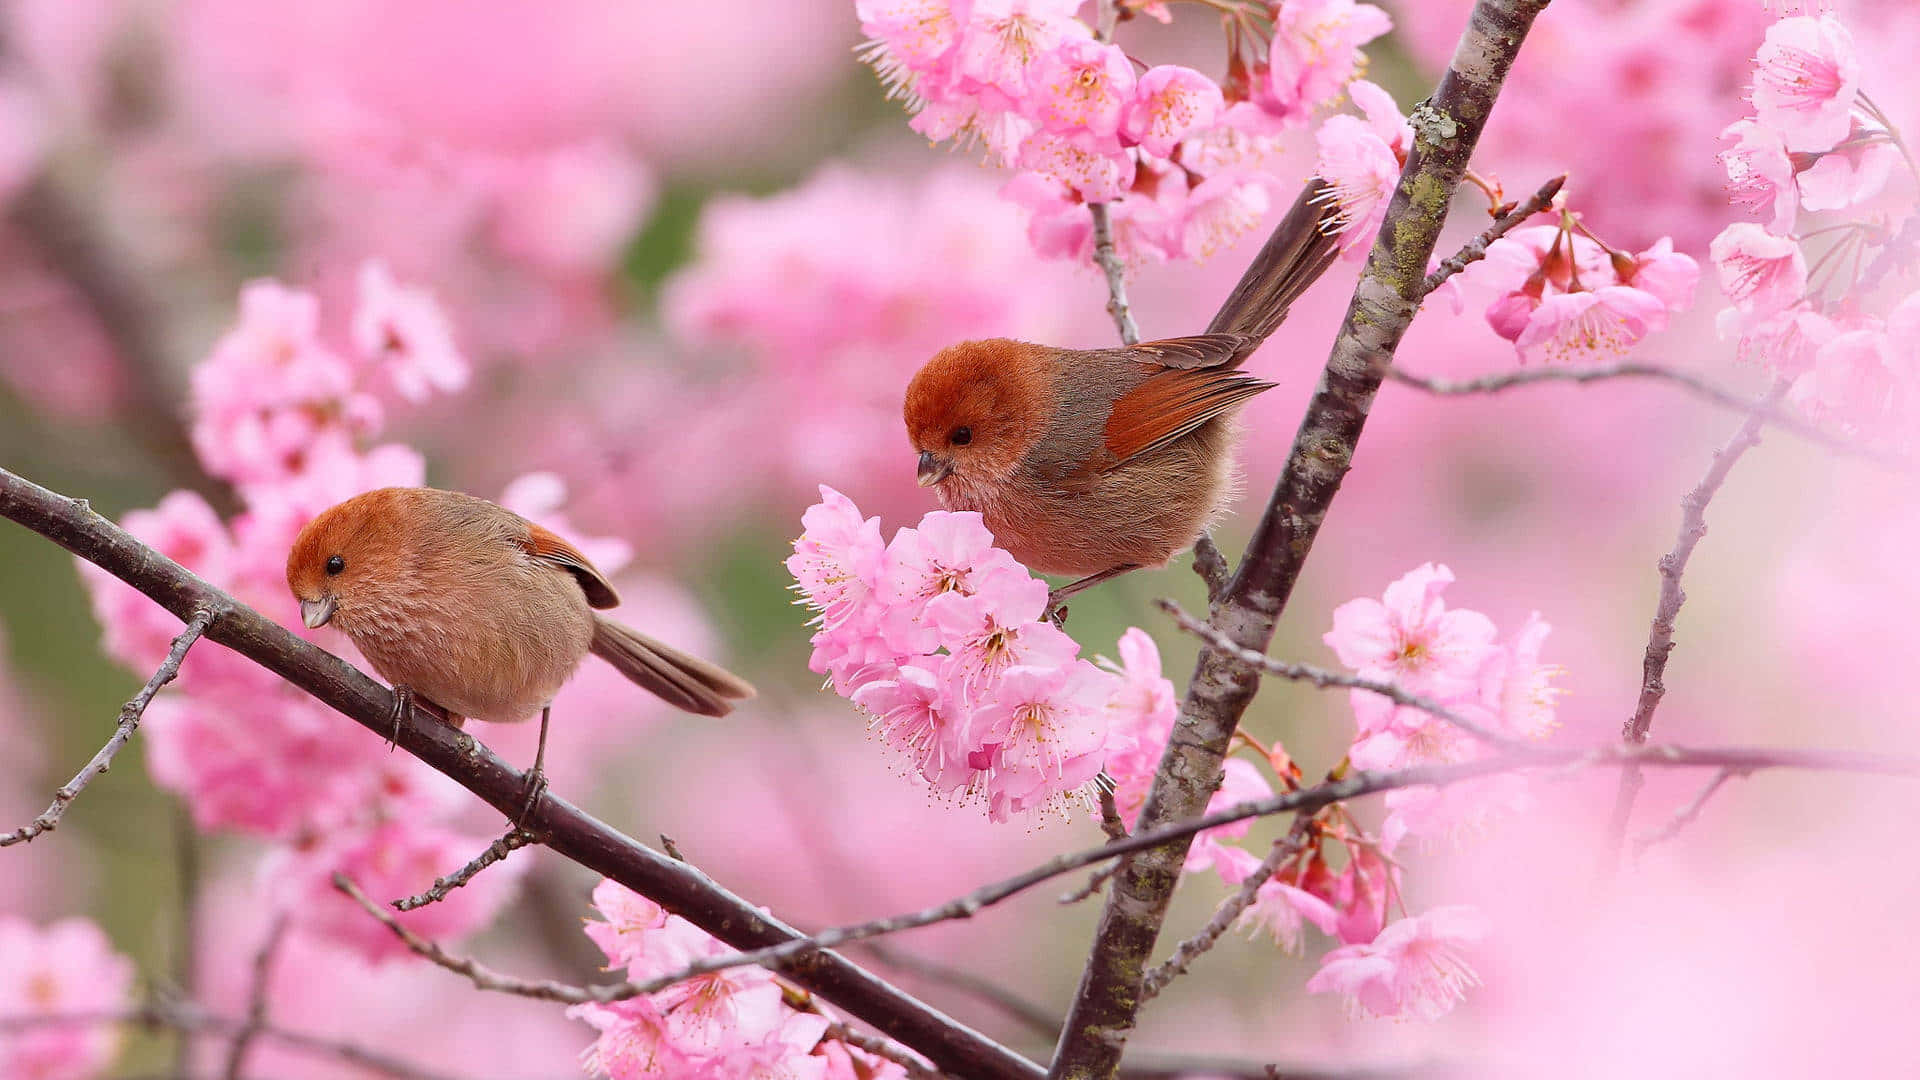 Two Birds Sitting On A Branch With Pink Blossoms Wallpaper